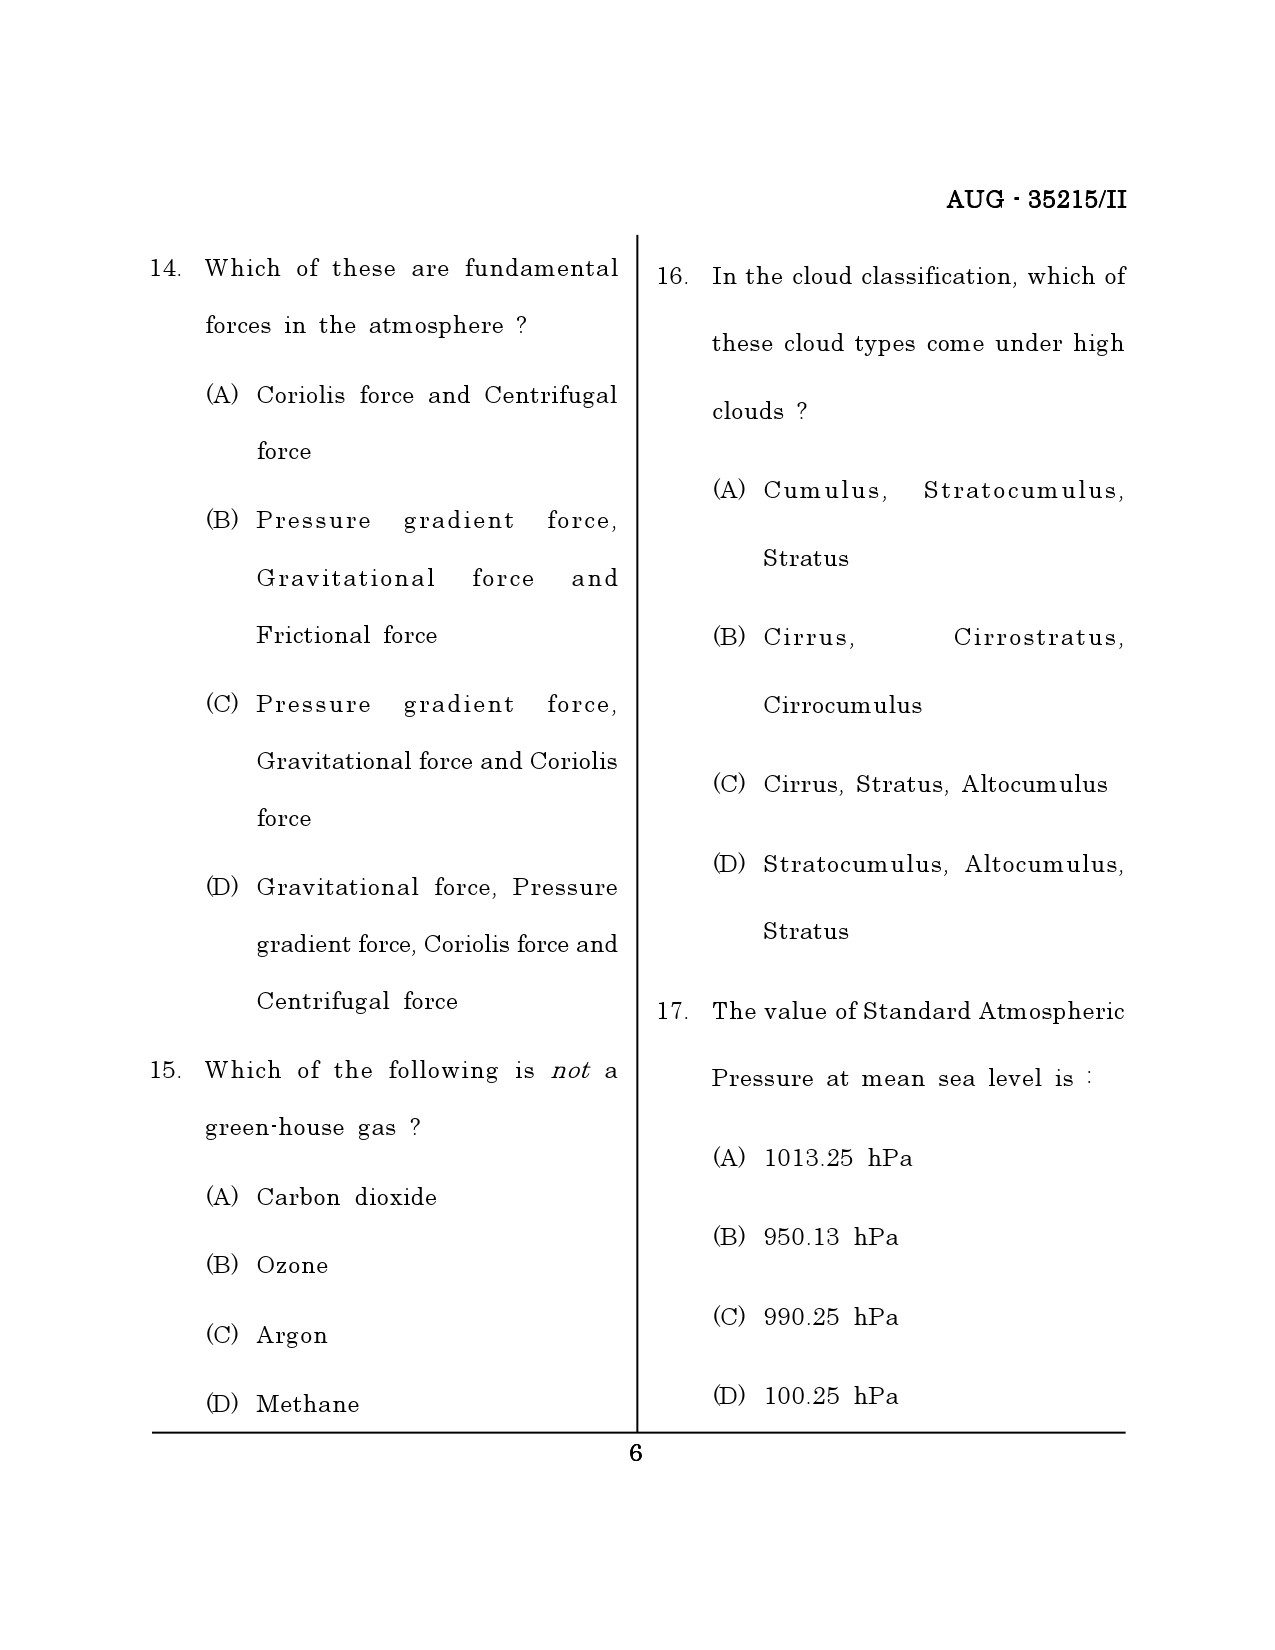 Maharashtra SET Earth Atmospheric Ocean Planetary Science Question Paper II August 2015 5